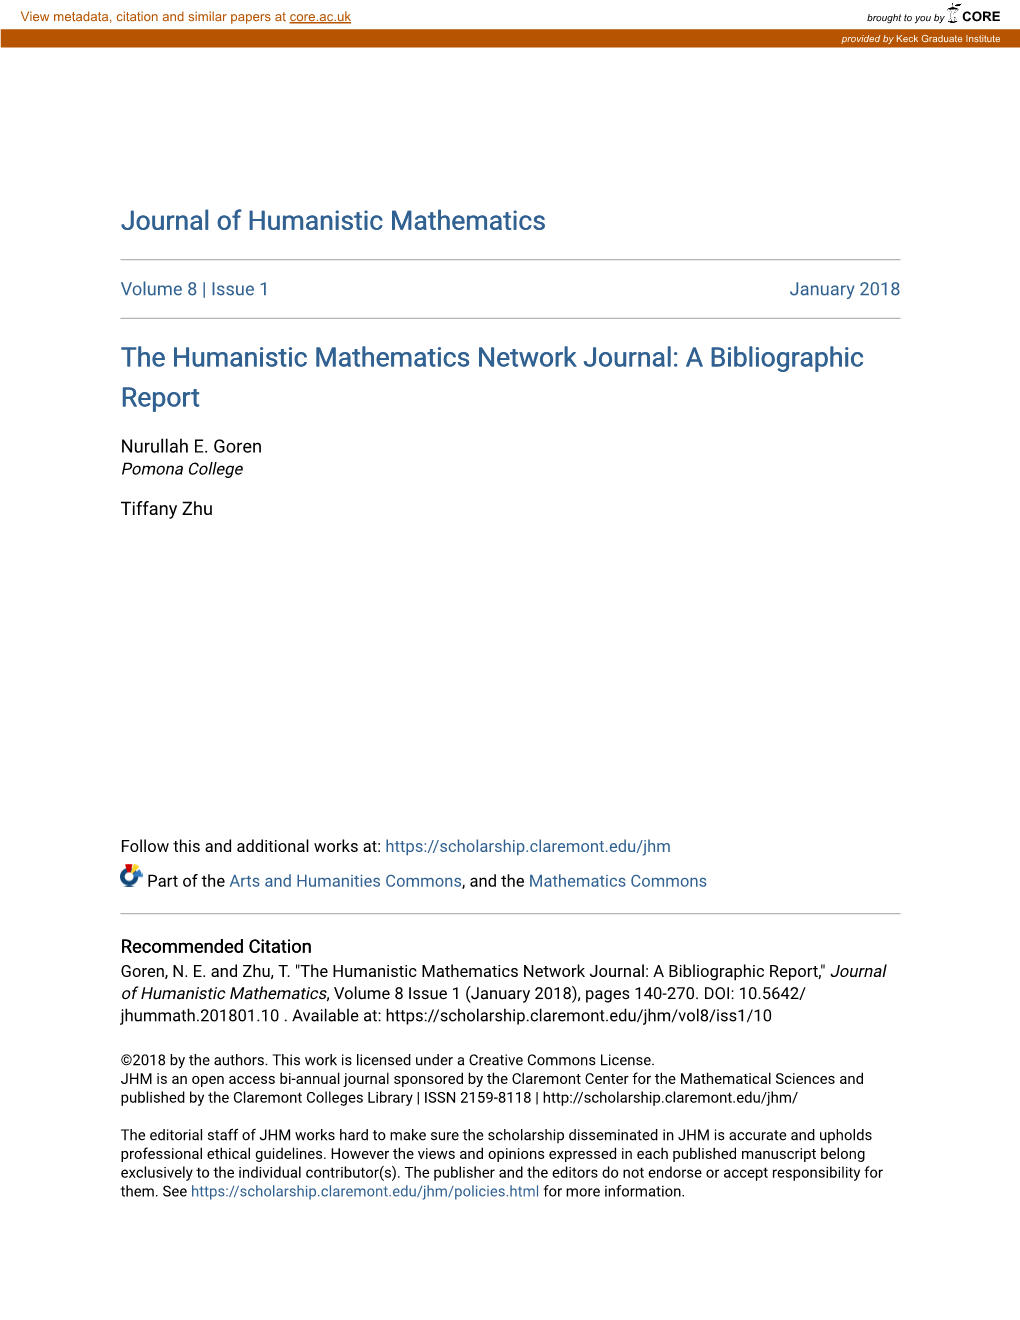 The Humanistic Mathematics Network Journal: a Bibliographic Report